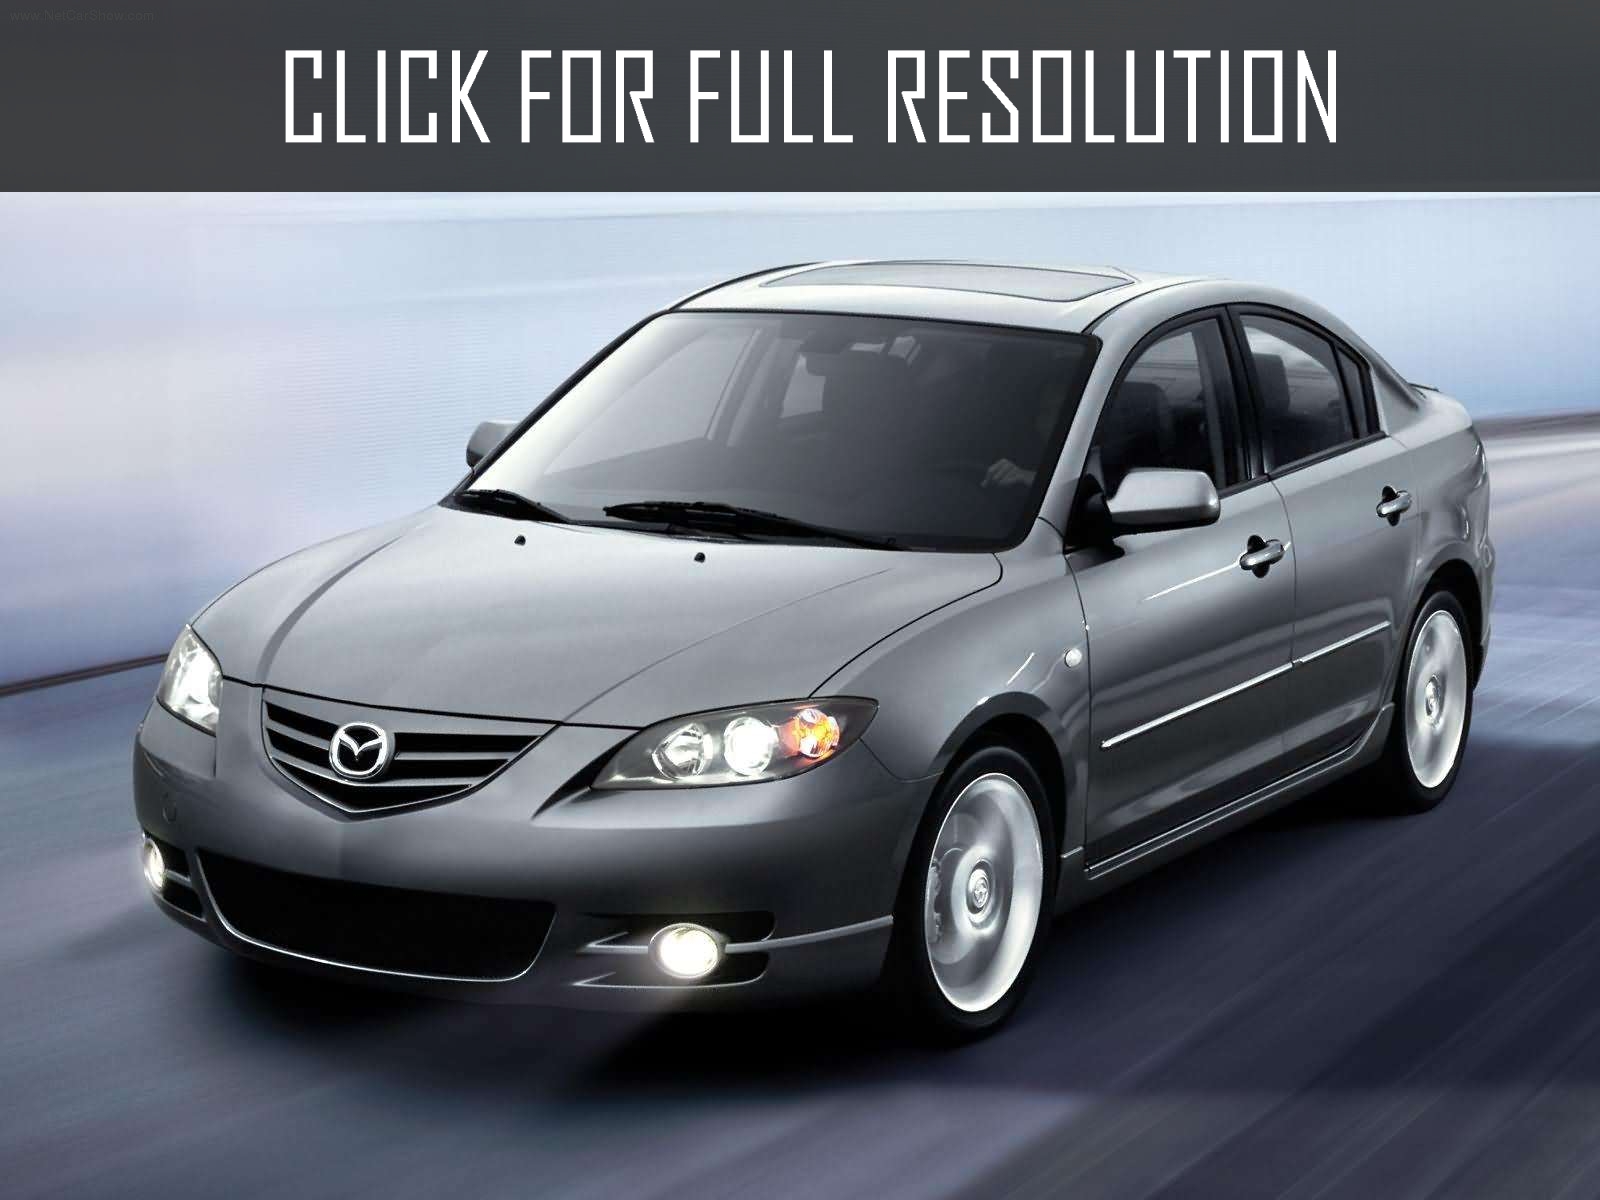 2004 Mazda 3 news, reviews, msrp, ratings with amazing